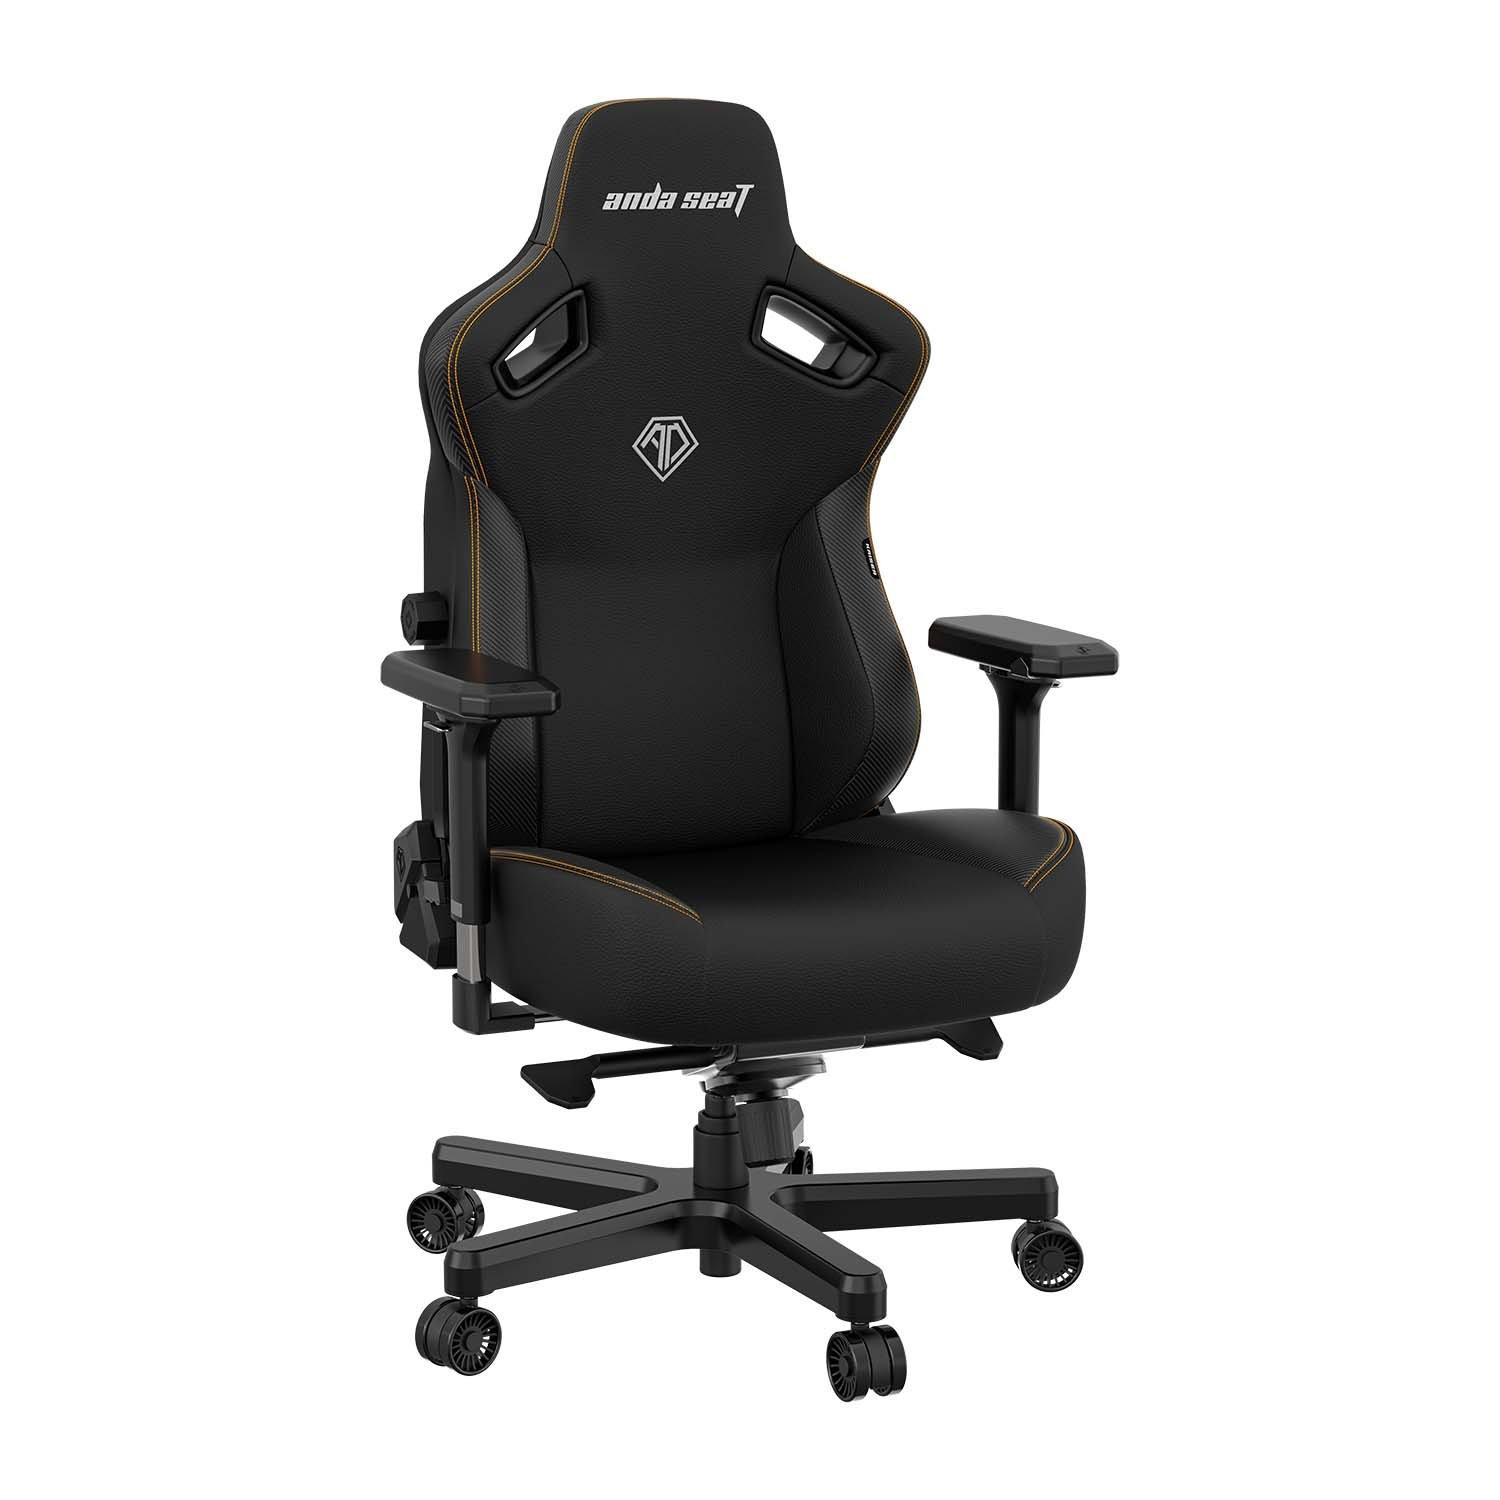 list item 4 of 7 AndaSeat Kaiser 3 XL Gaming Chair - Black 